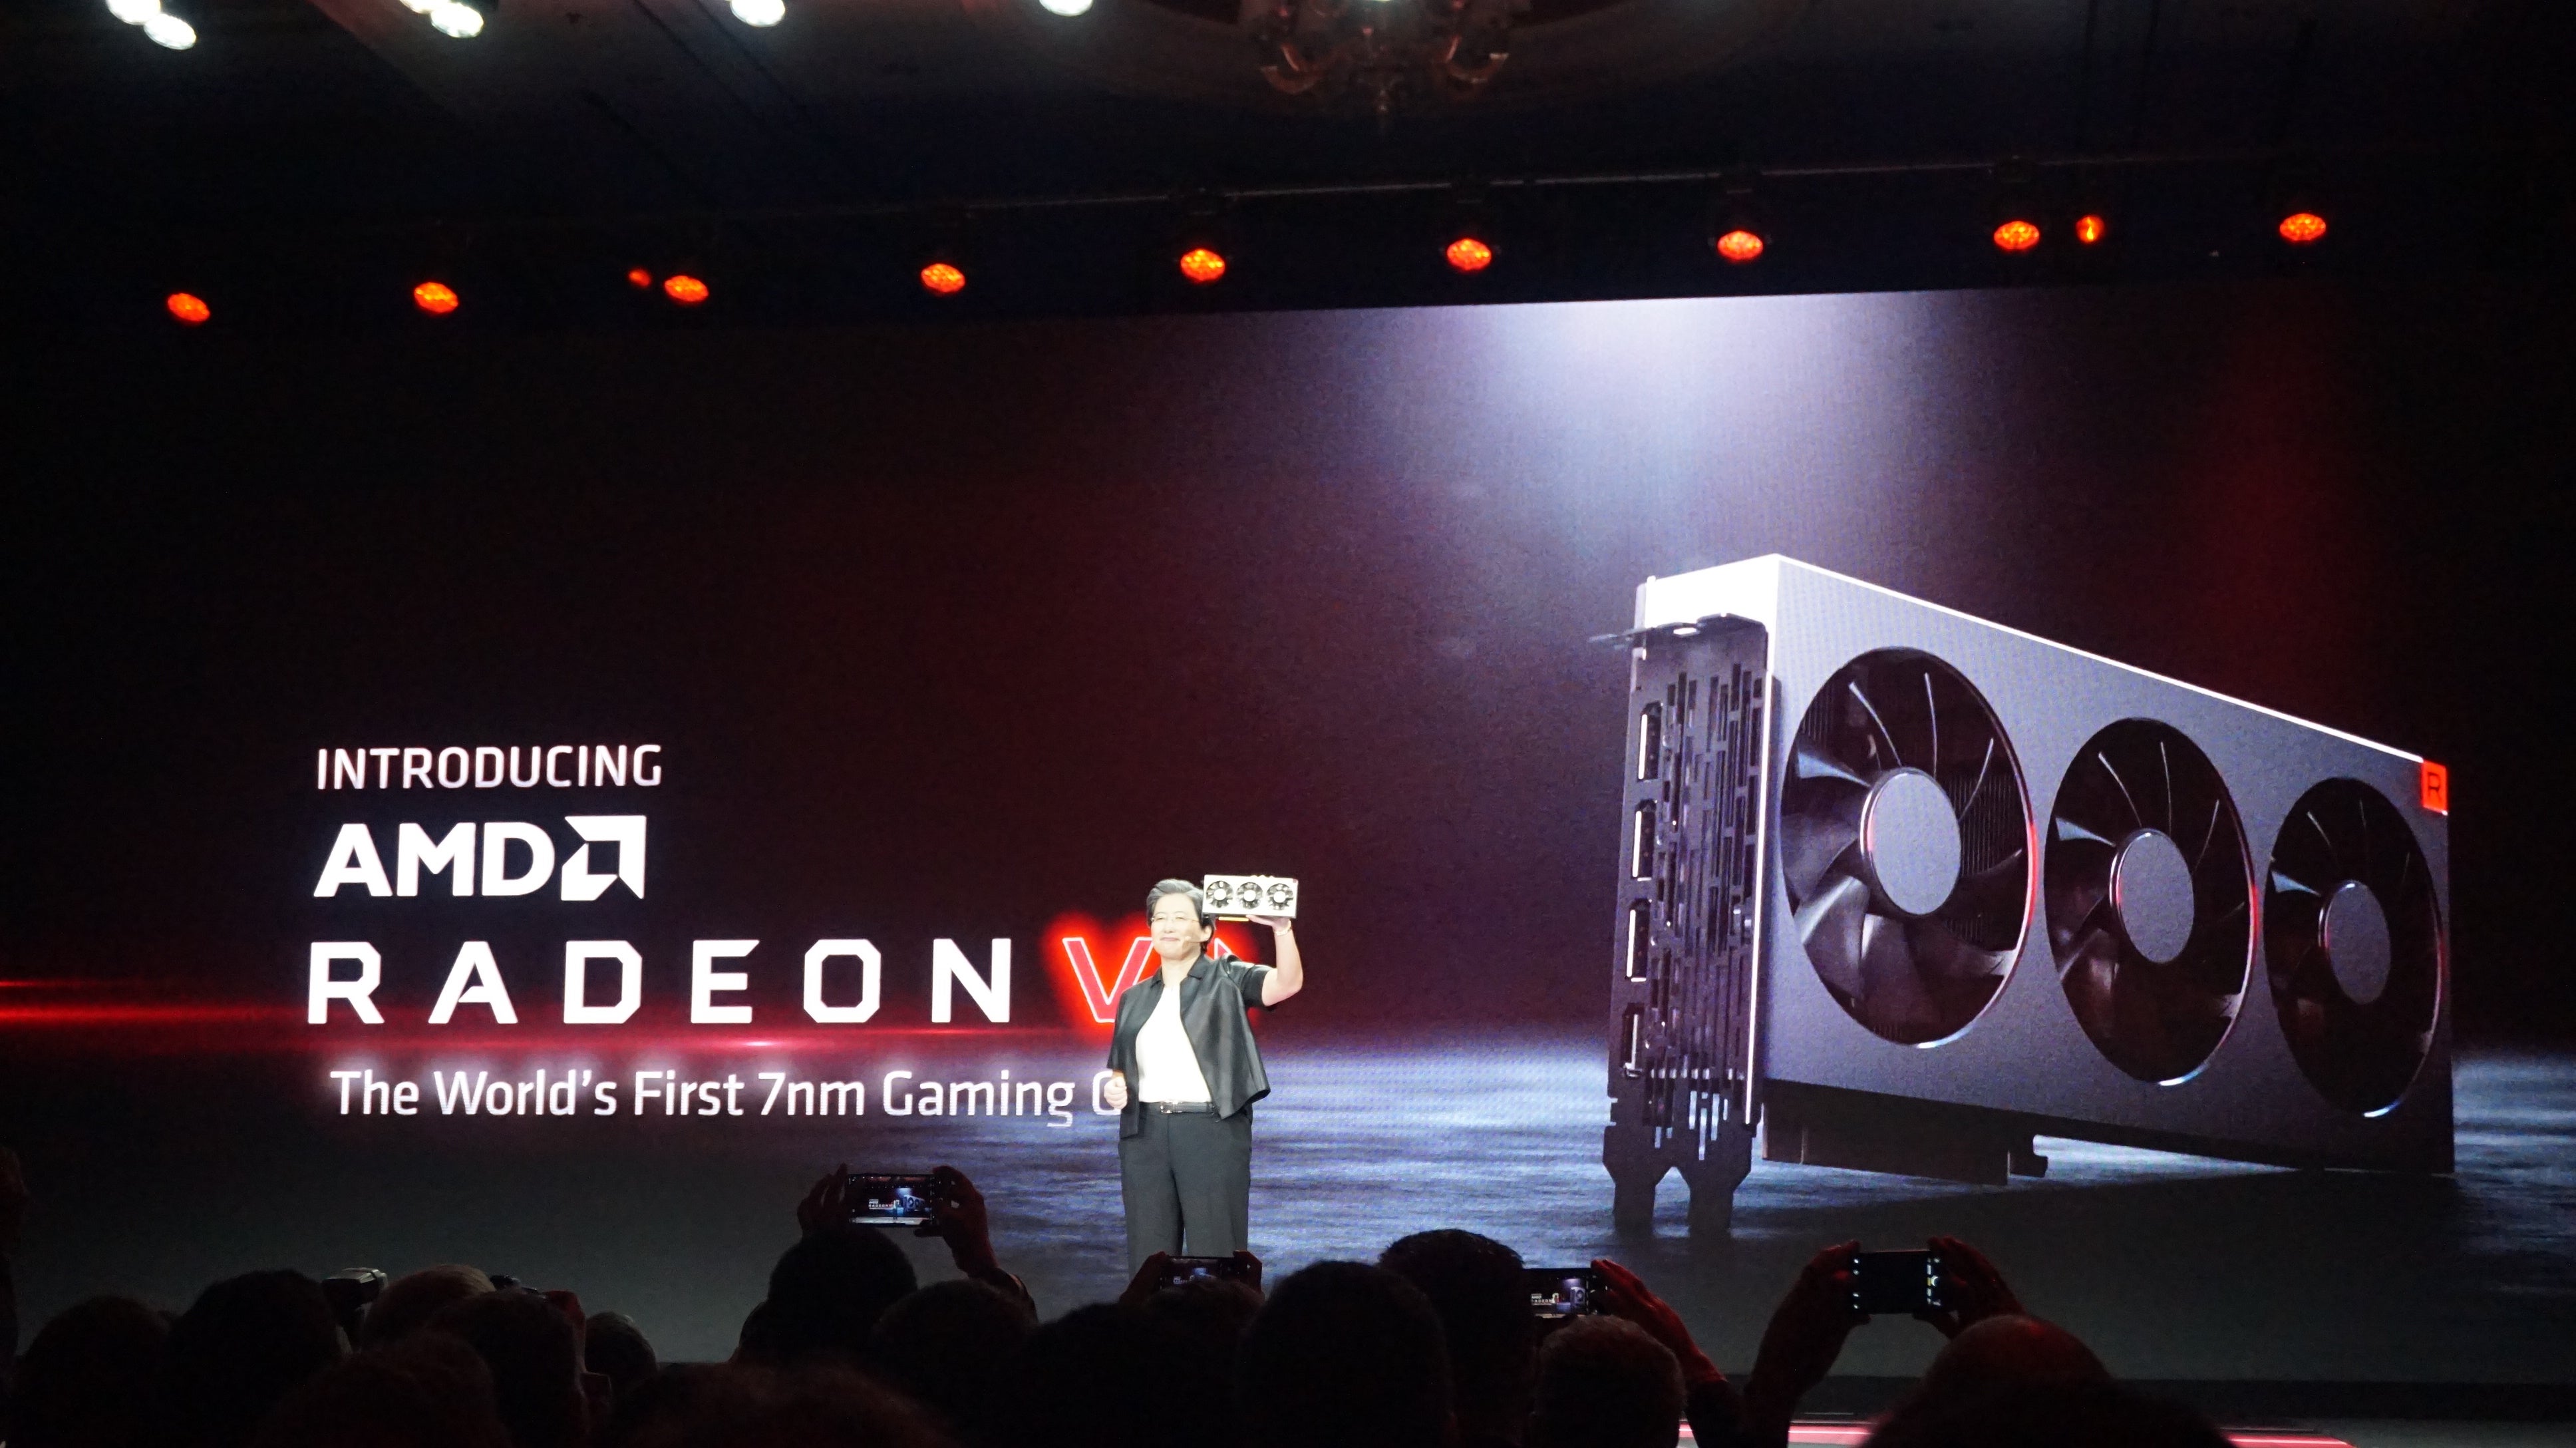 Image for CES 2019: AMD's 7nm Radeon VII could be an RTX 2080 killer (updated)